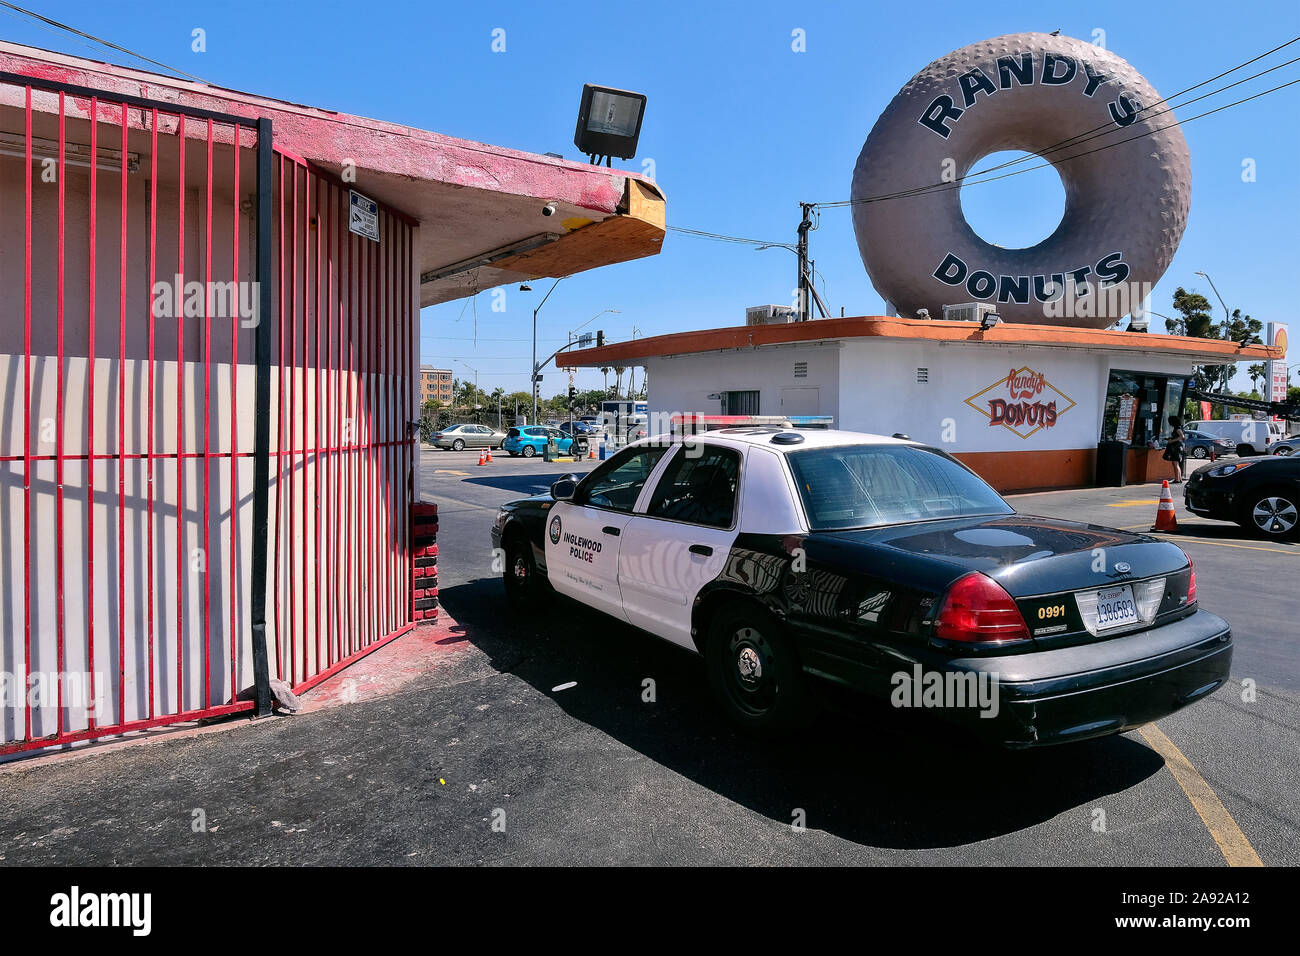 Police car in front of legendary donut snack 'Randy 's Donut' in the district Inglewood, Los Angeles, California, USA Stock Photo